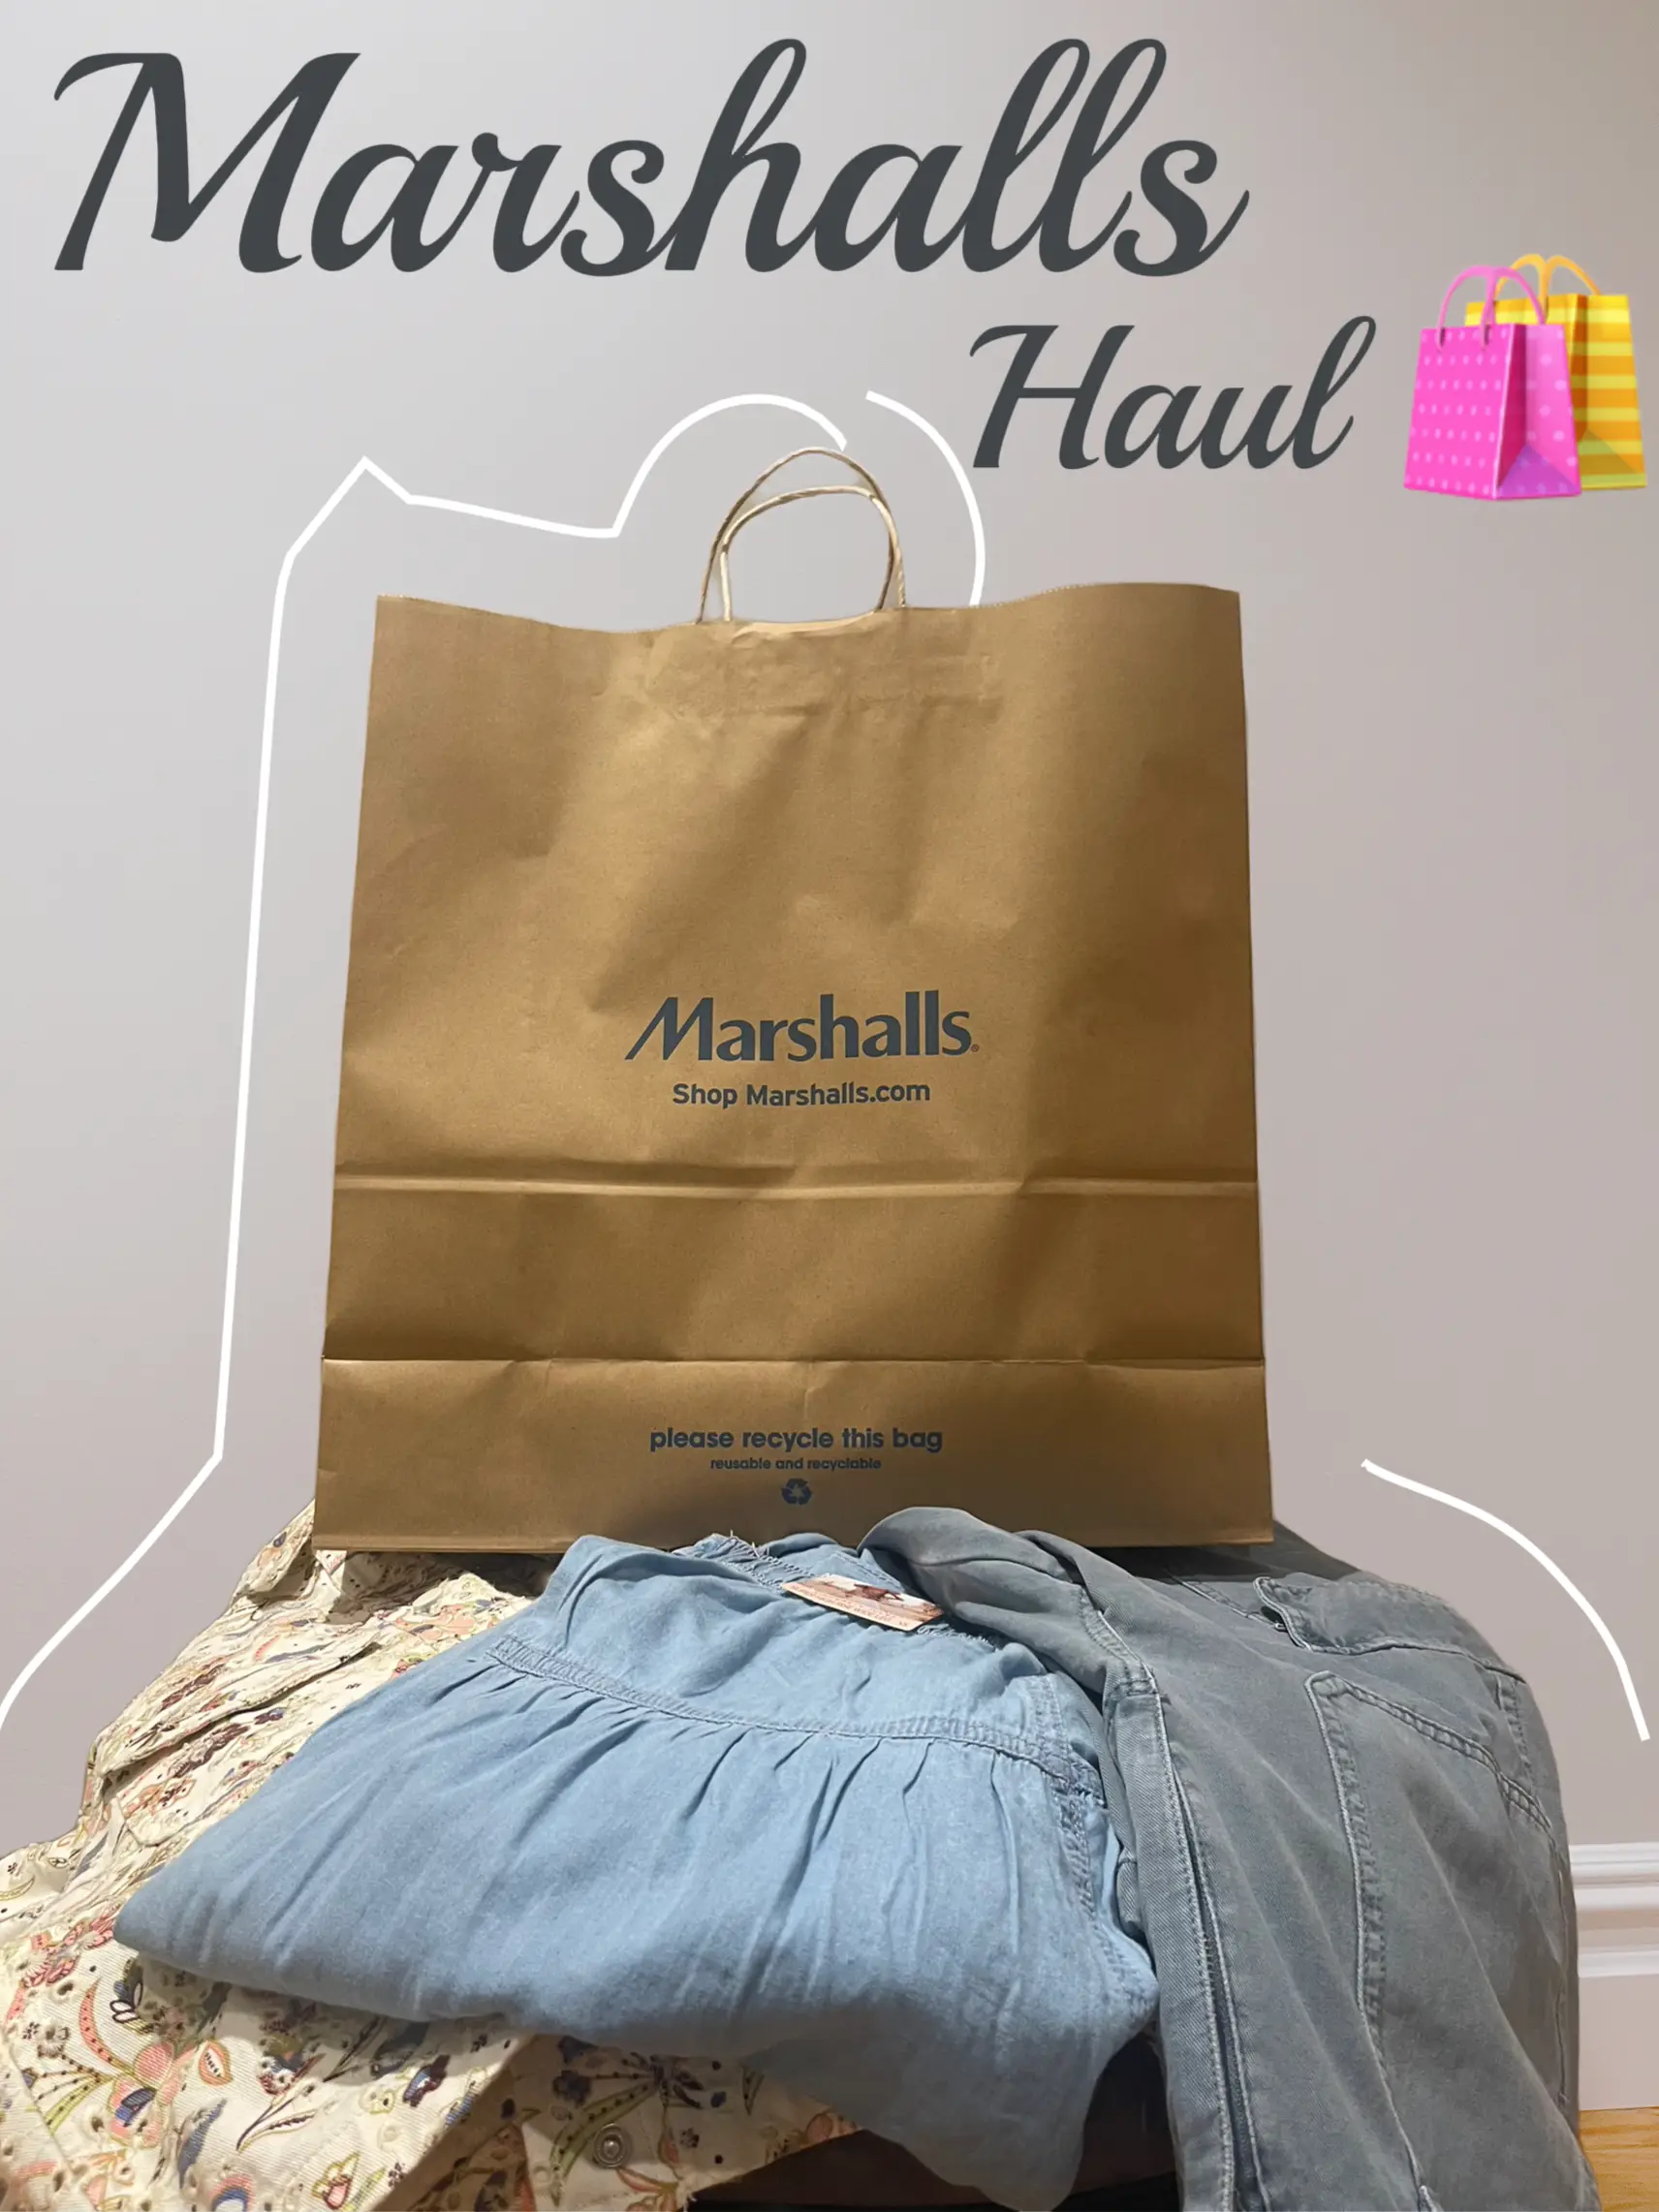 MARSHALLS HAUL REVIEW, Gallery posted by Julia